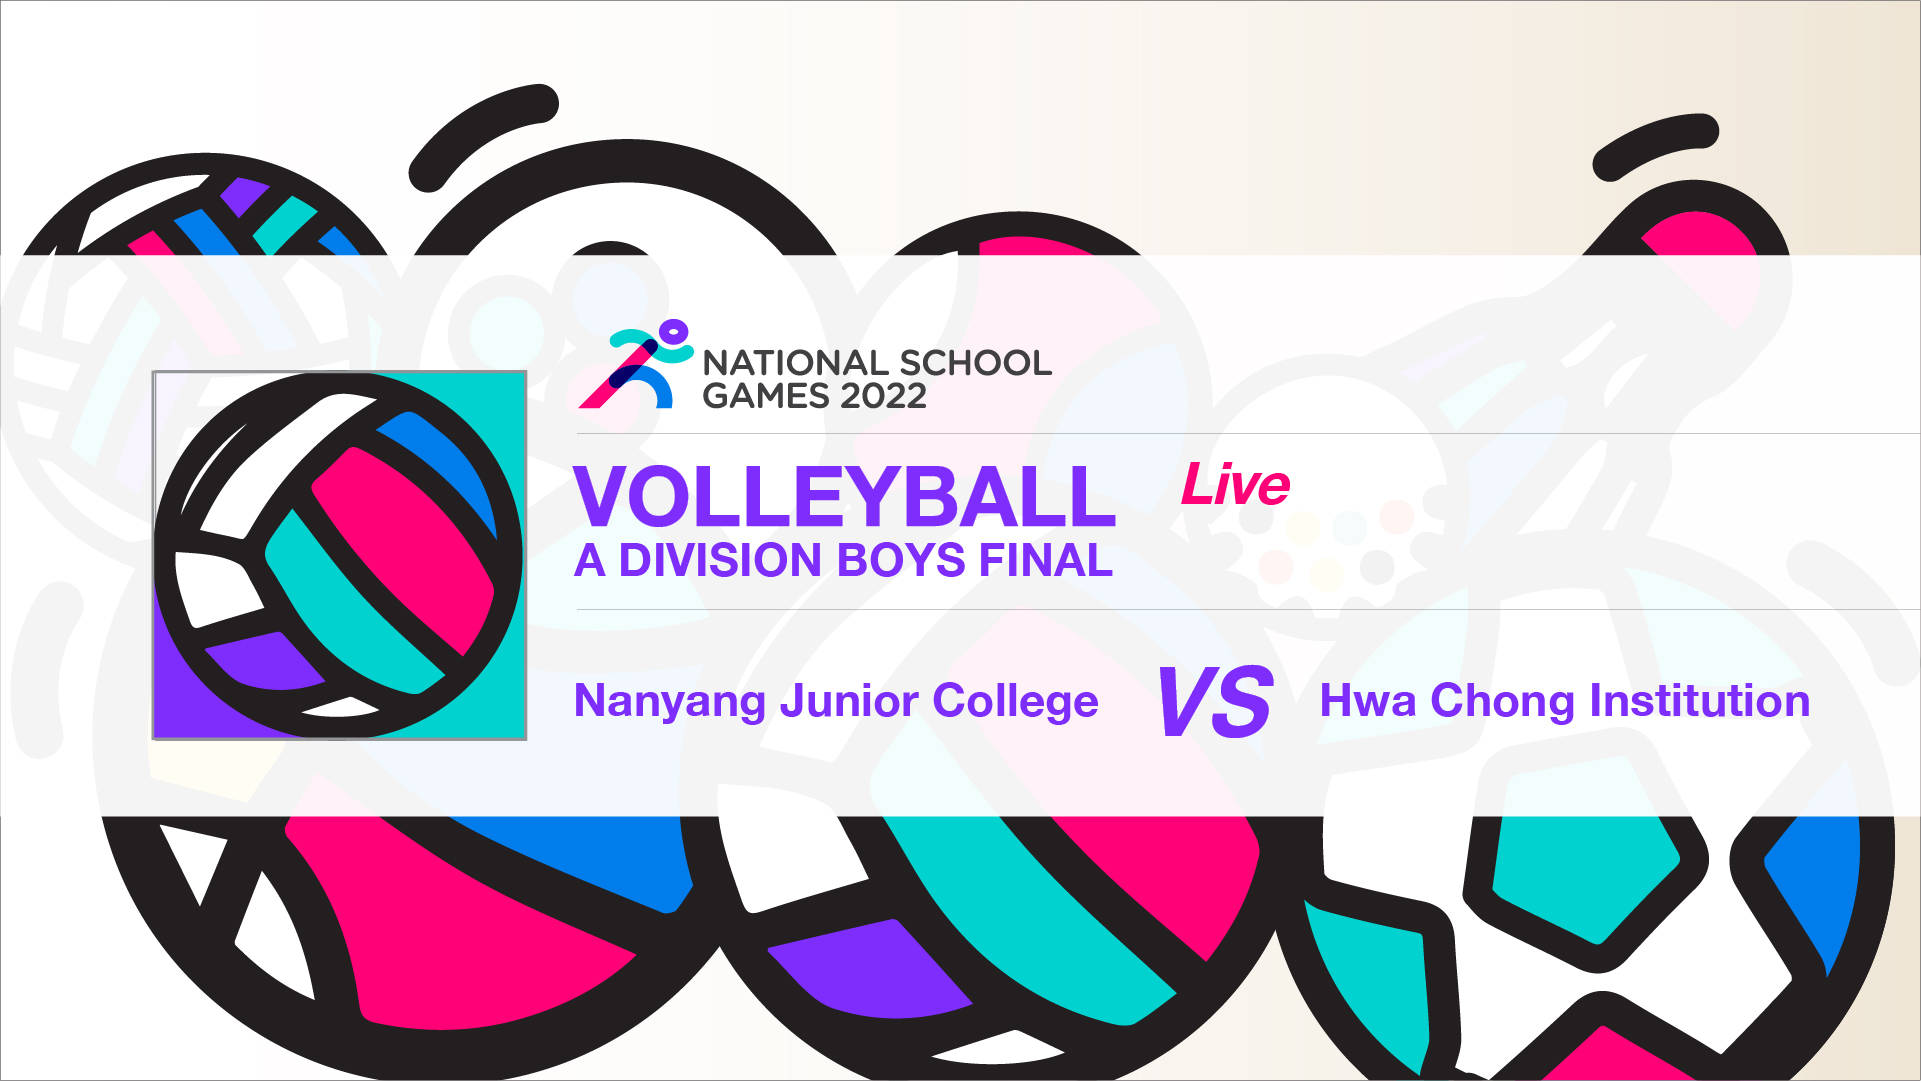 SSSC Volleyball A Division Boys Final | Nanyang Junior College vs Hwa Chong Institution